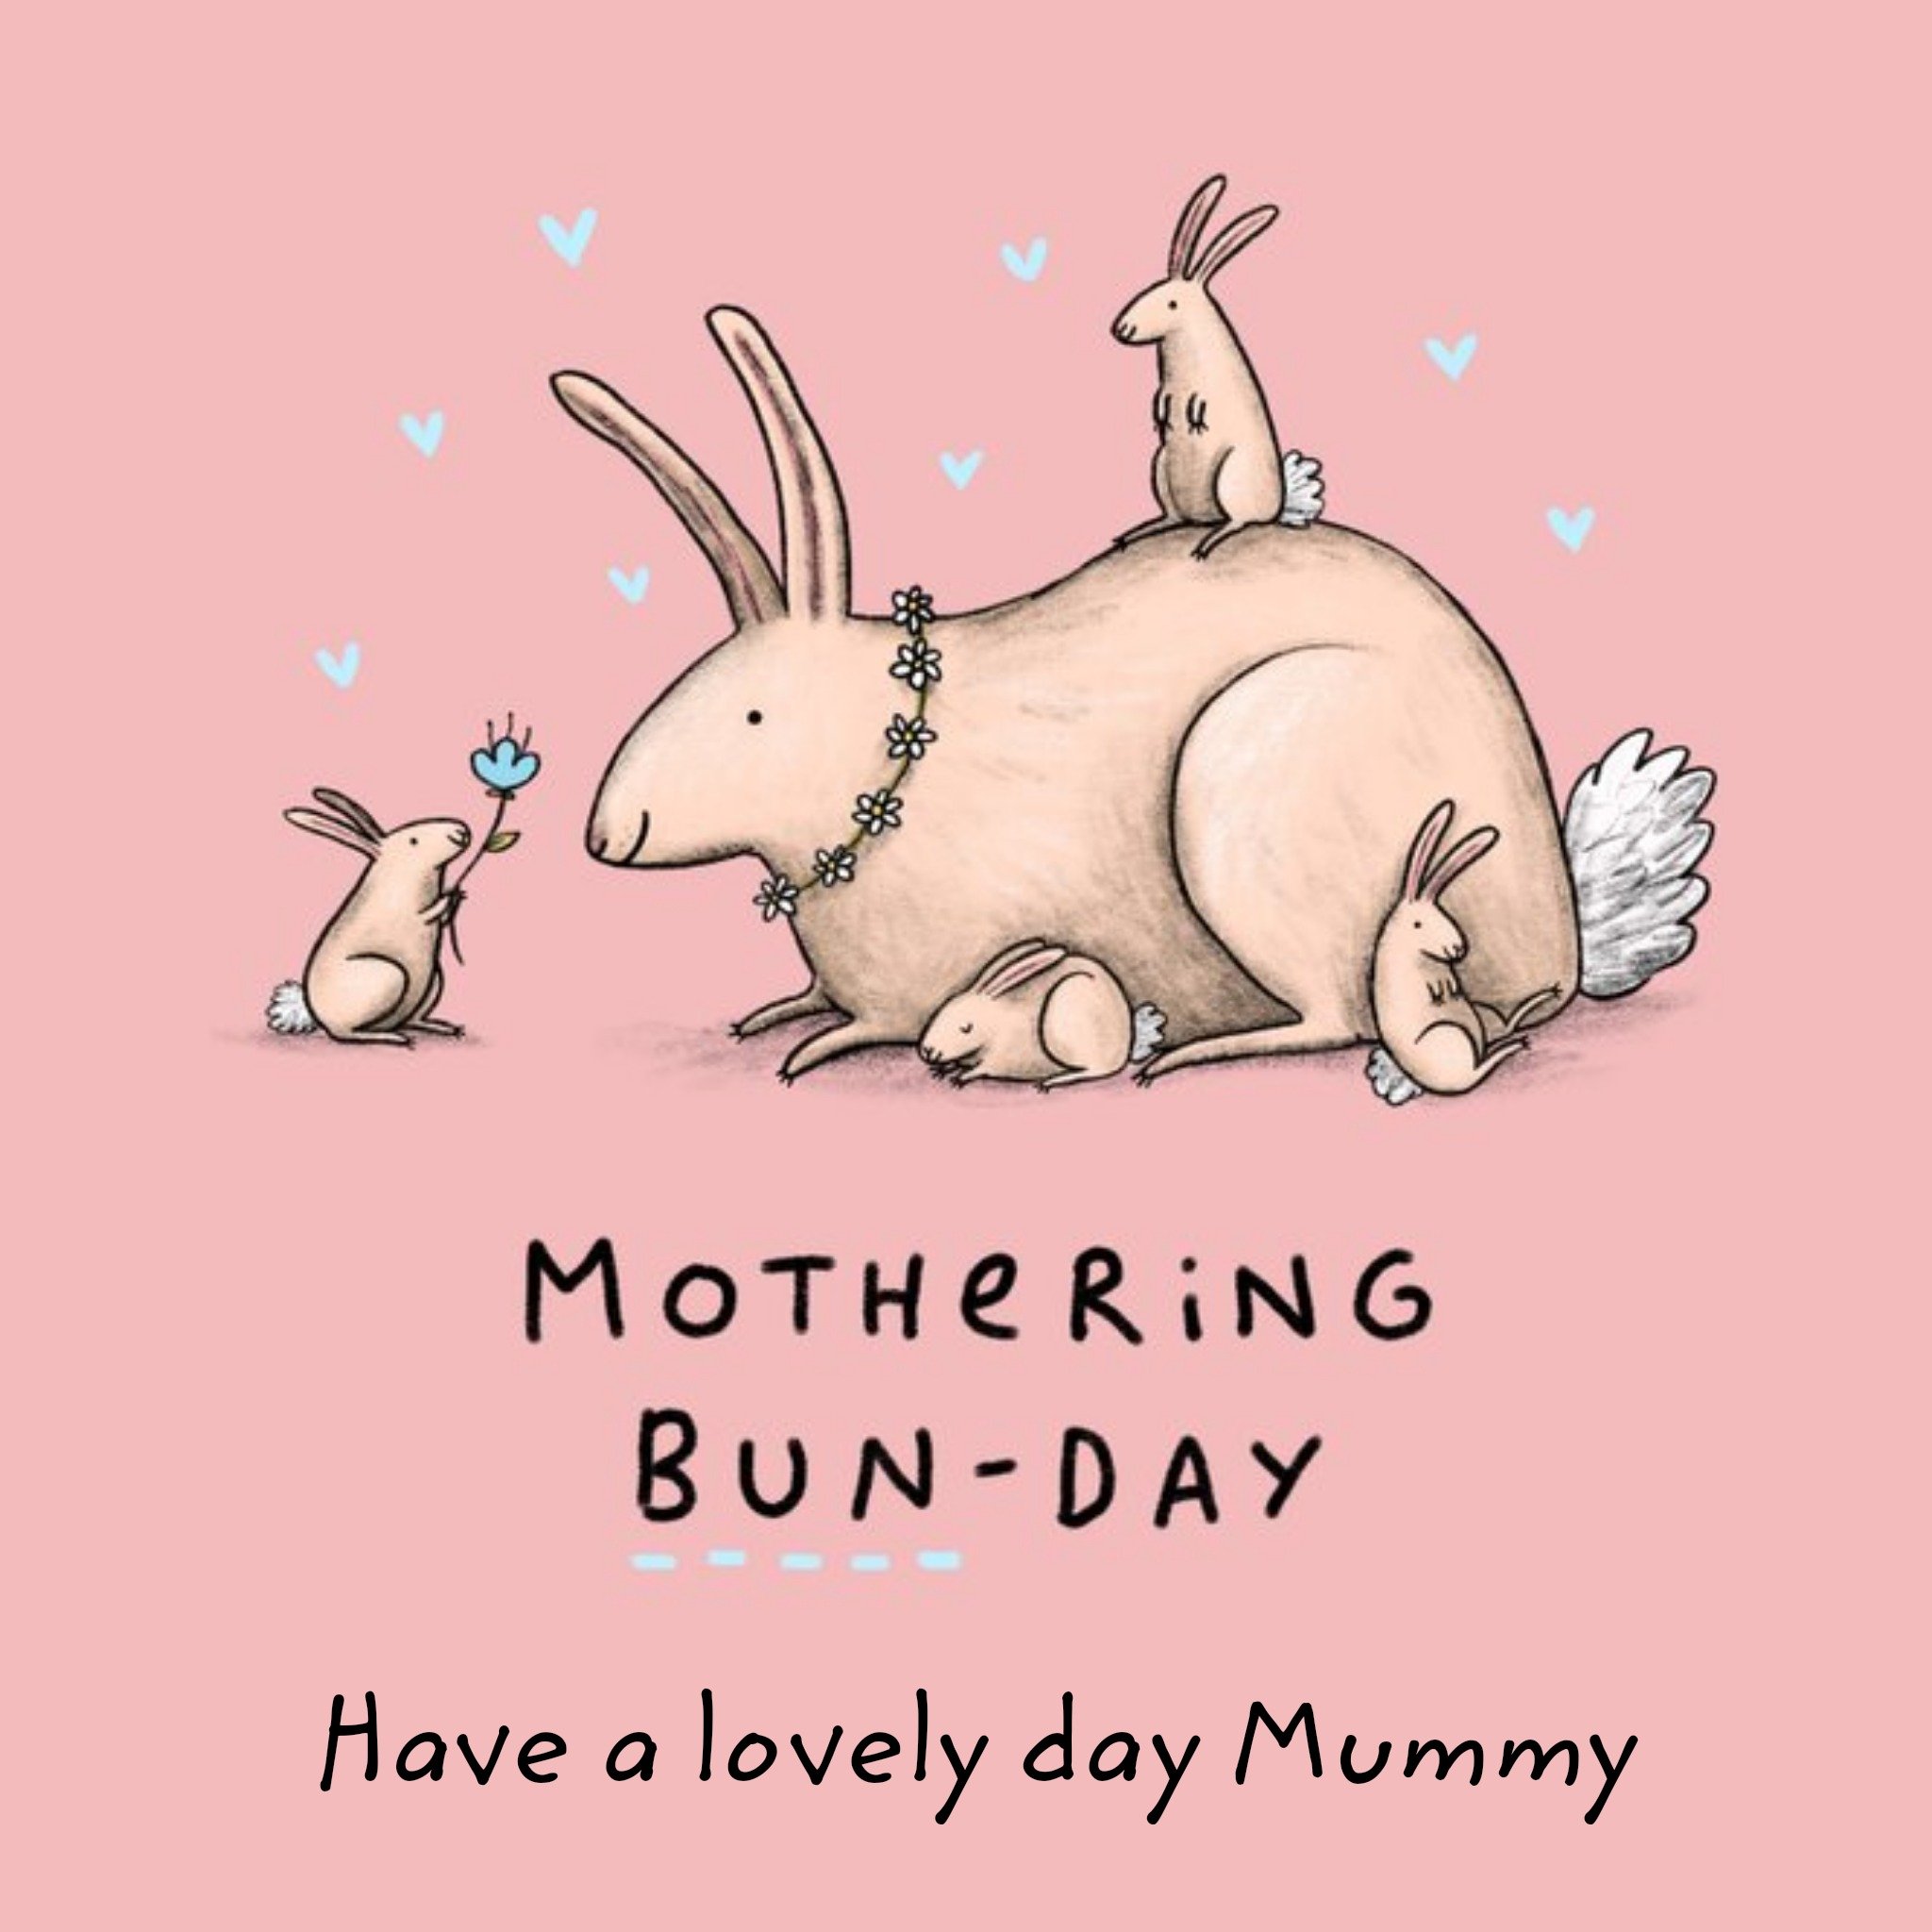 Moonpig Punny Mothering Bun-Day Happy Mother's Day Card, Square